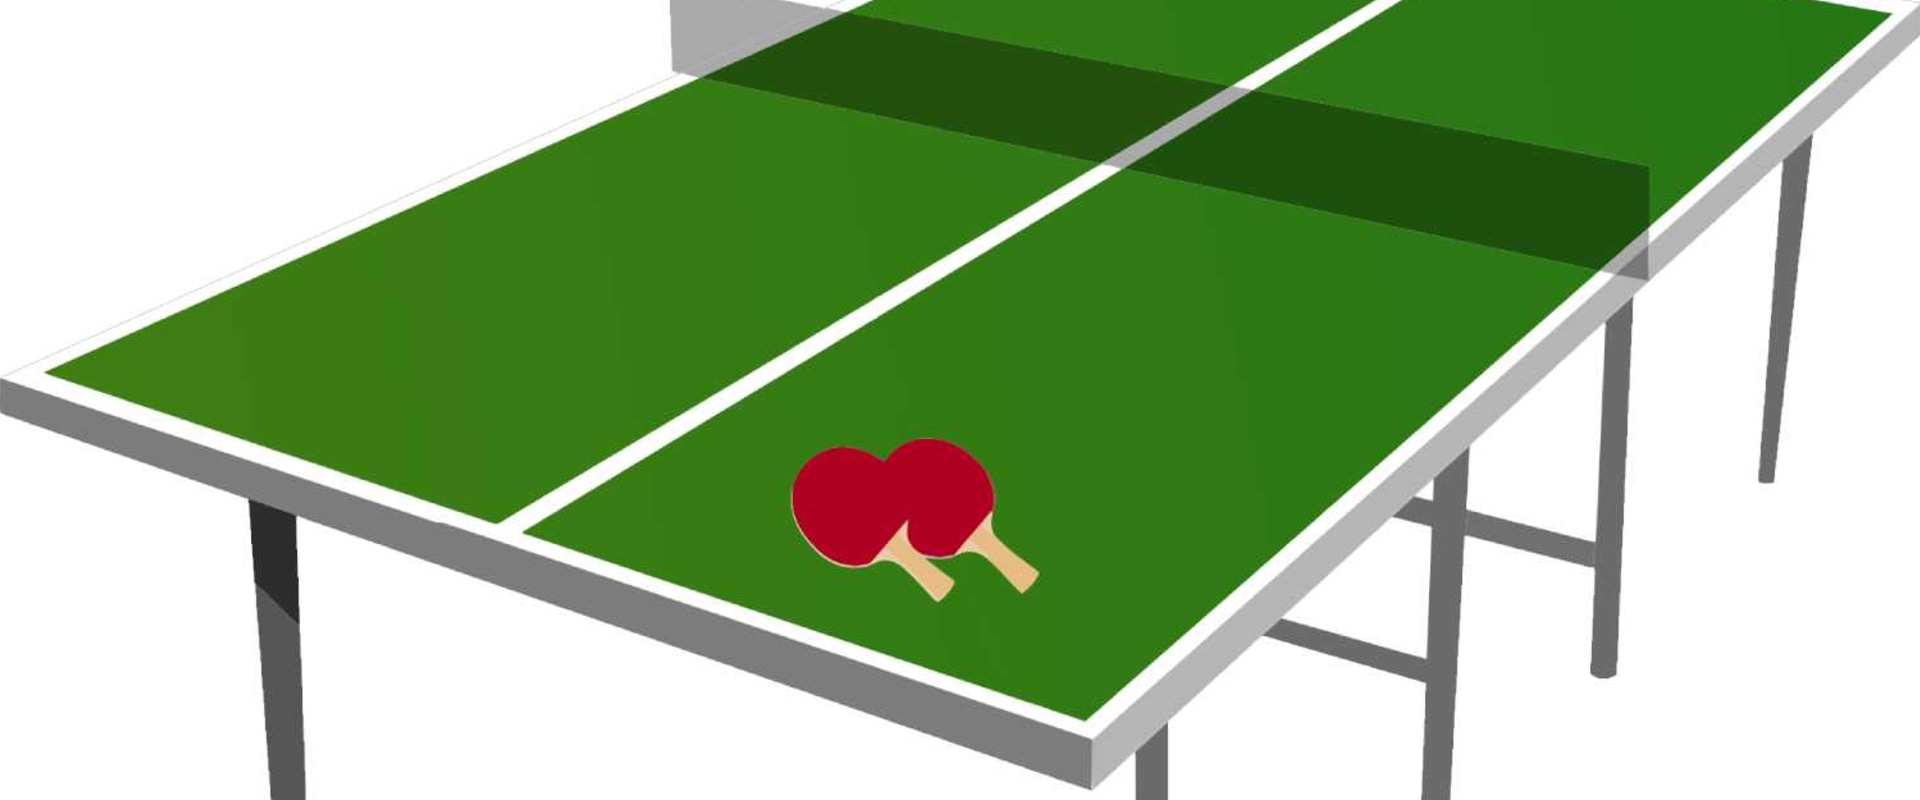 What is the Size of a Regulation Table Tennis Ball?